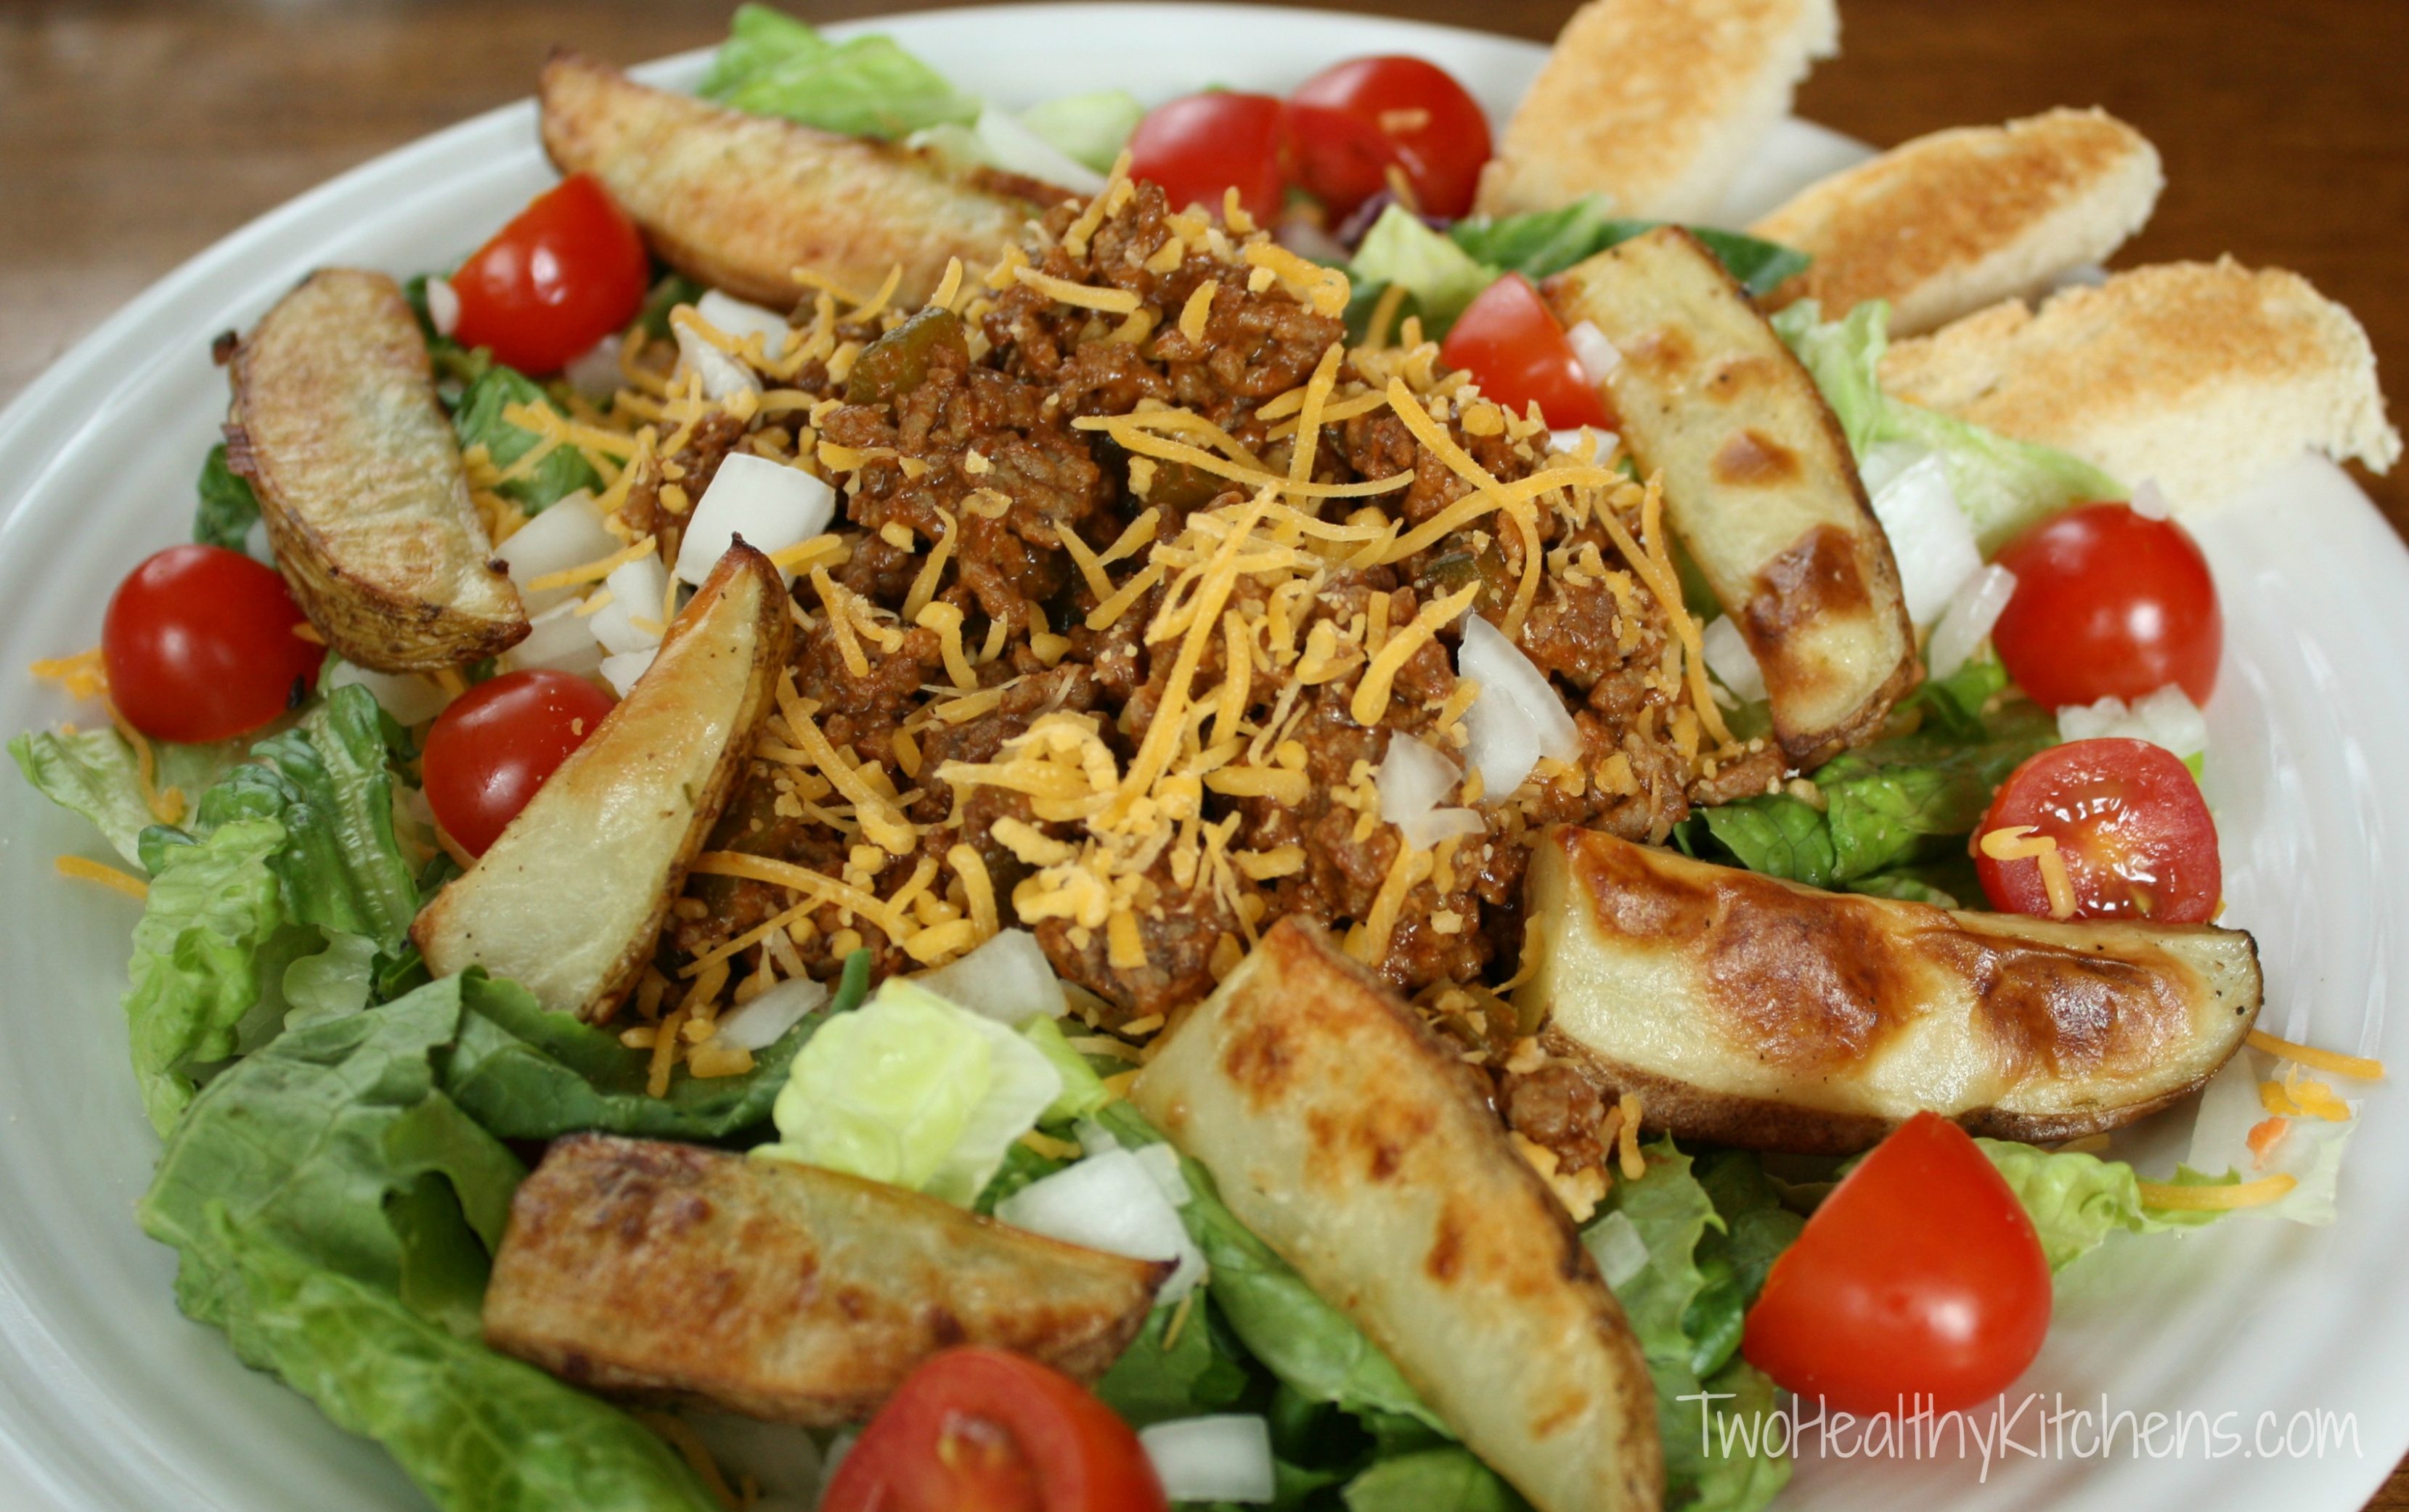 Cheeseburger Salad with Oven-Roasted Fries Recipe {www.TwoHealthyKitchens.com}